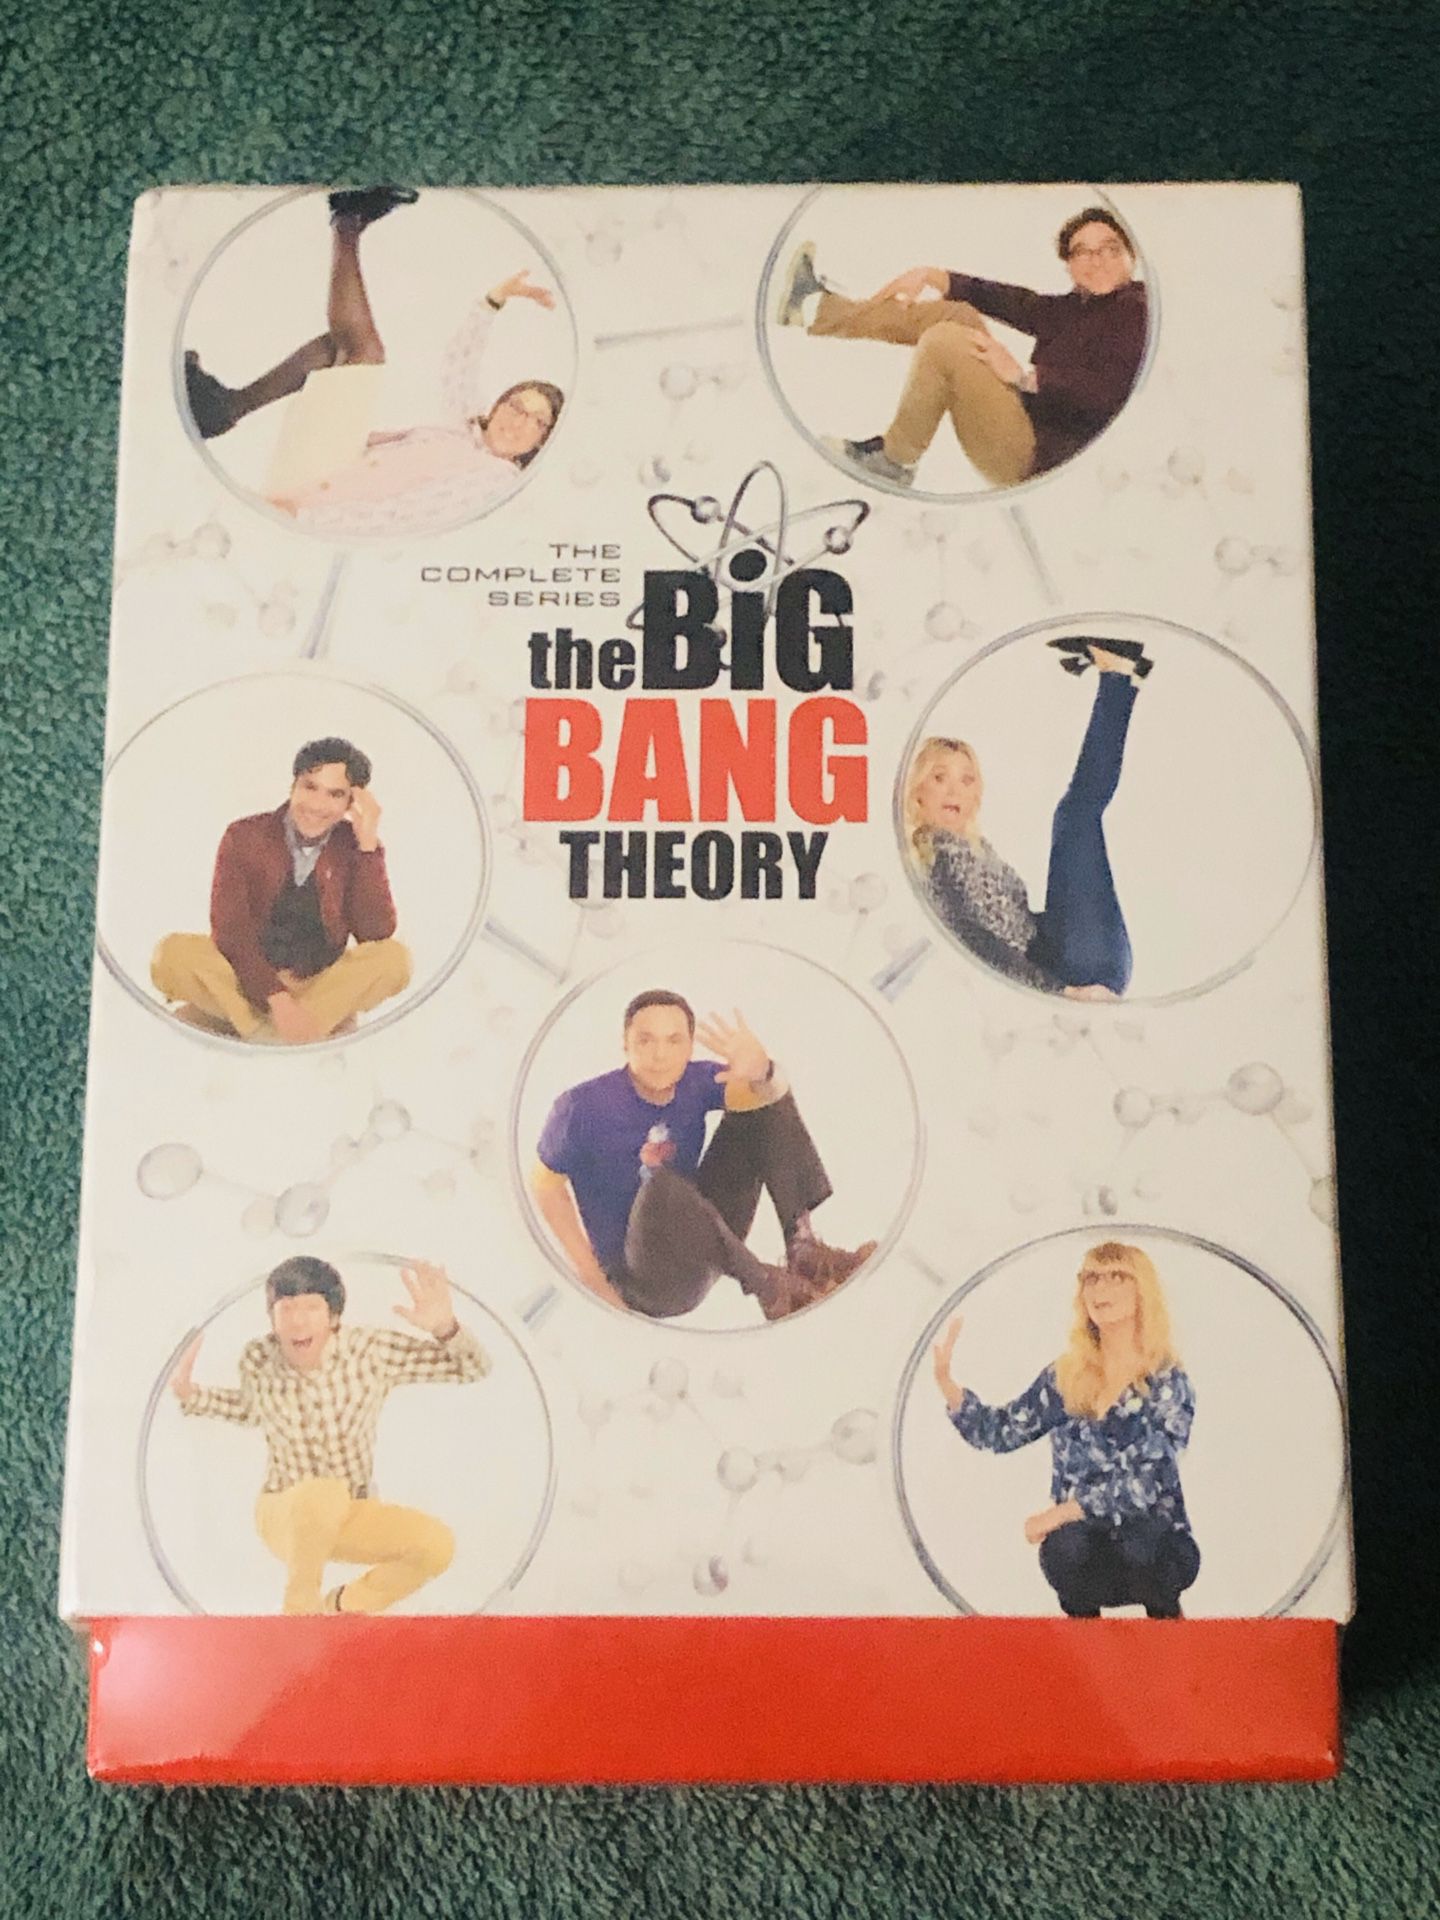 THE BIG BANG THEORY COMPLETE SERIES (ALL 12 SEASONS) SEALED